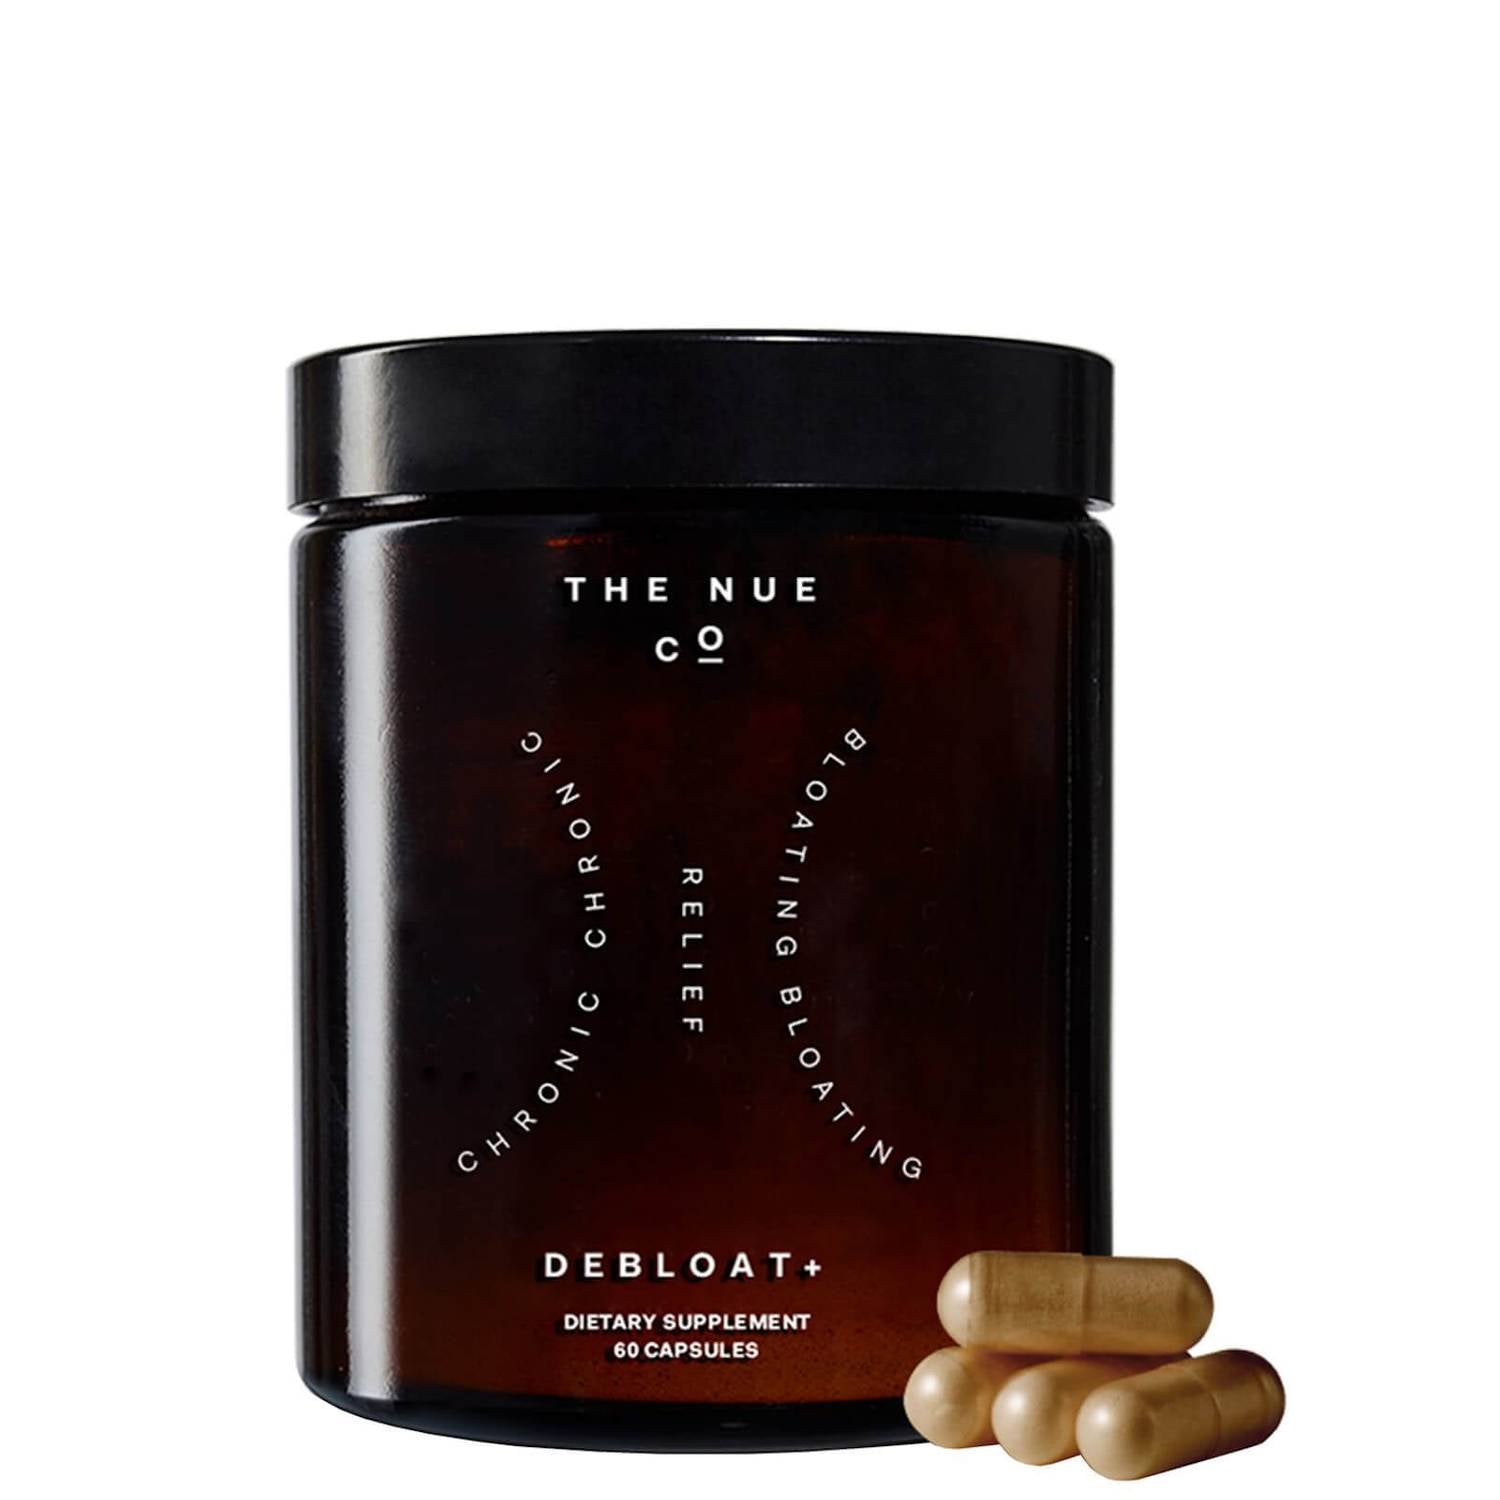 Brown Capsules sit in front of the DEBLOAT+ product packaging